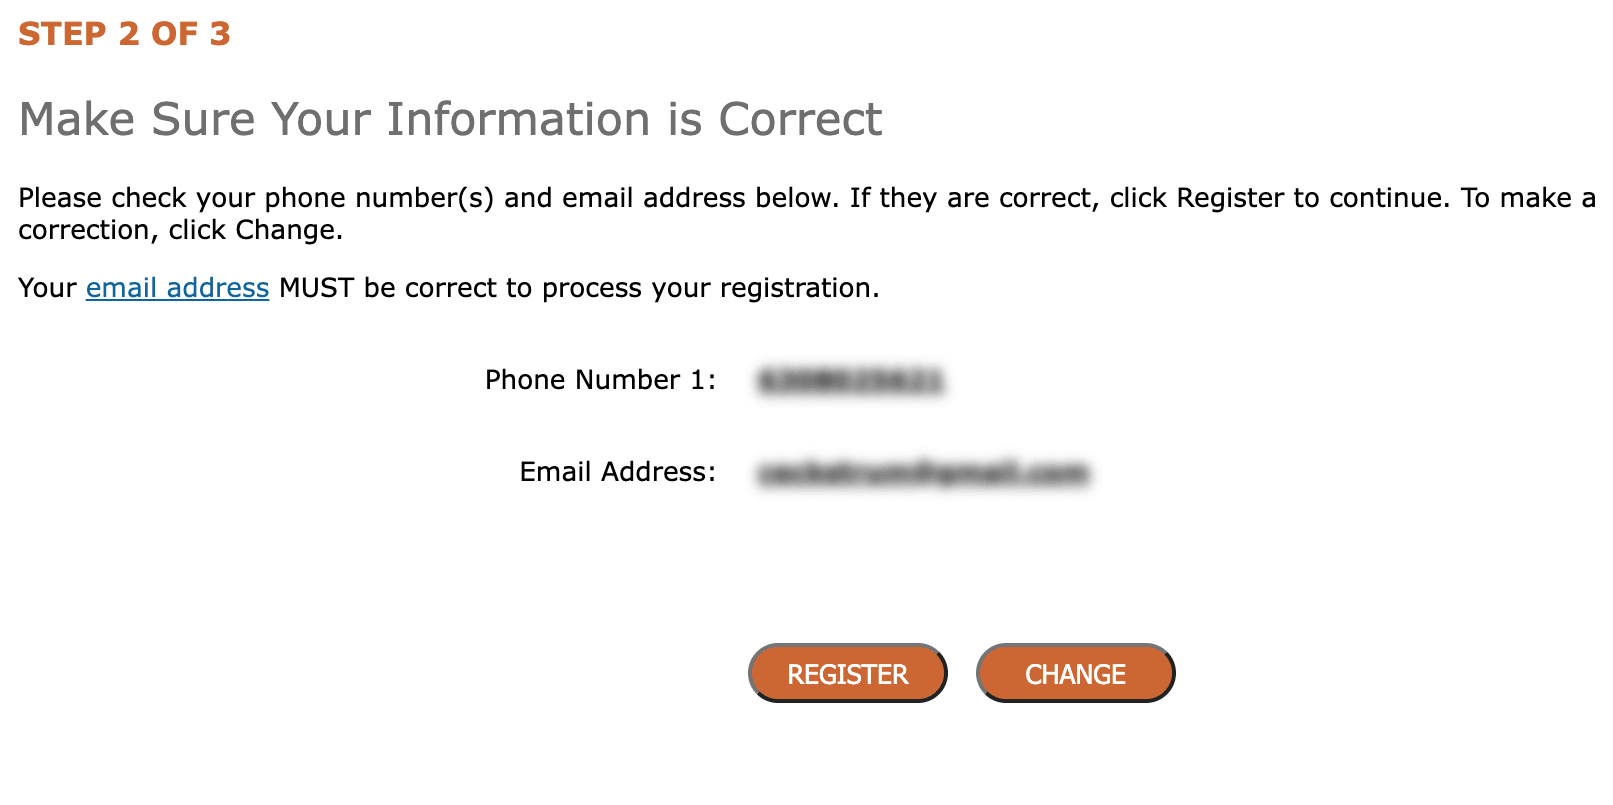 Confirm Your Contact Information